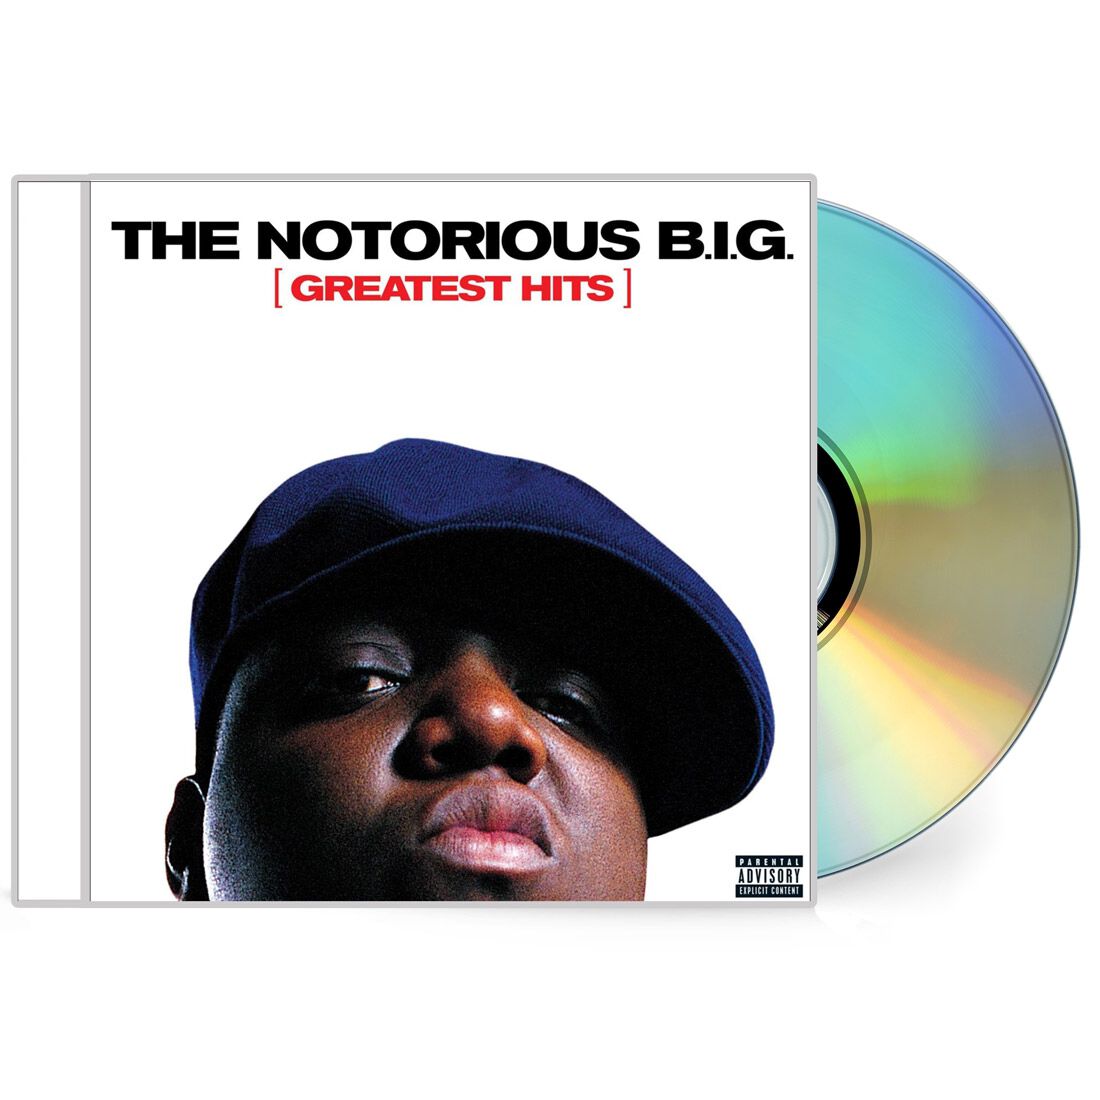 Buy The Notorious B.I.G. Vinyl and CDs | Dig! Store